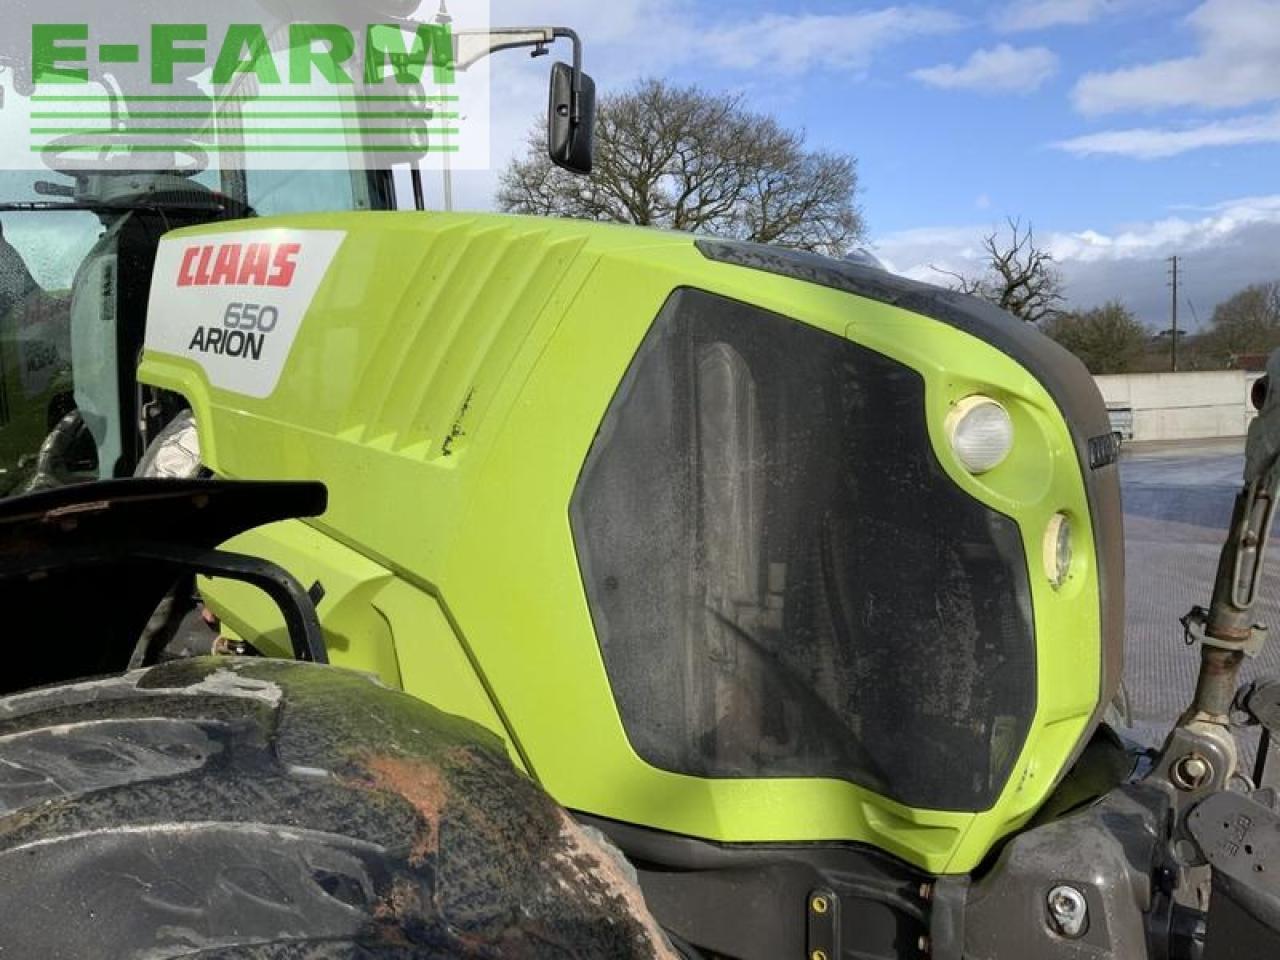 Tractor agricol CLAAS 650 arion tractor (st15805): Foto 11